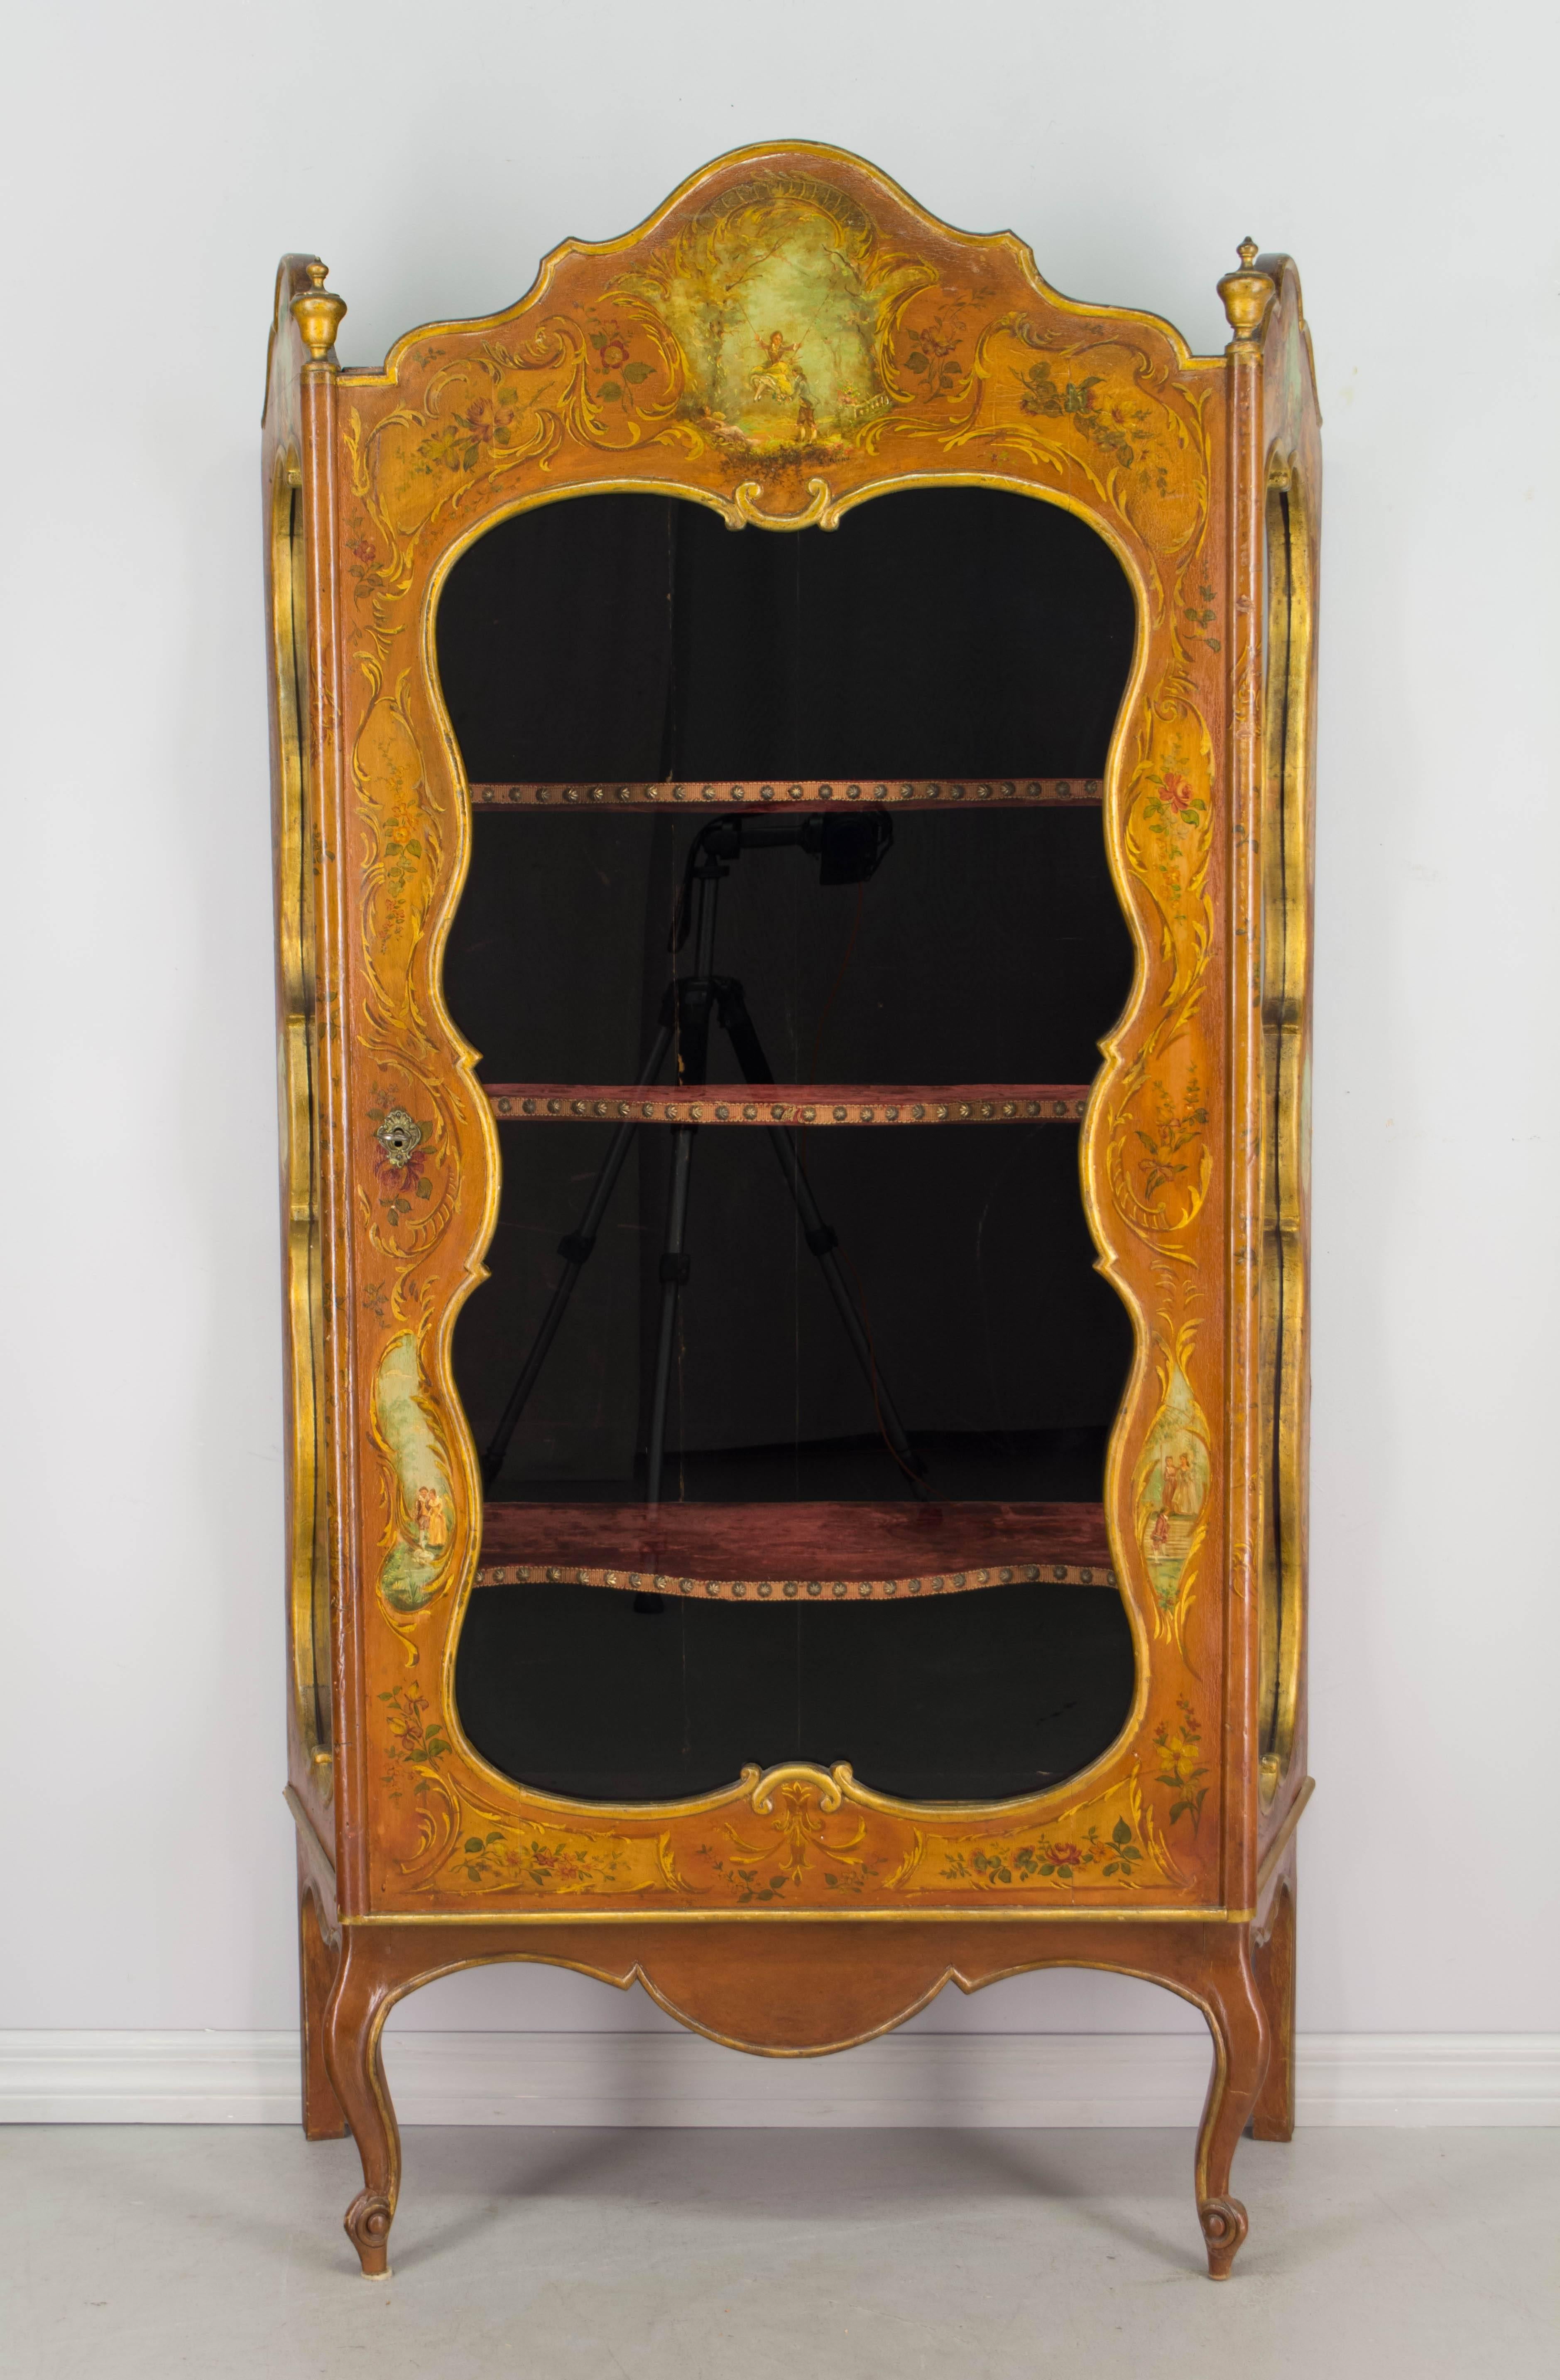 An original polychrome painted vitrine with three shaped adjustable shelves recovered with burgundy velvet, romantic scenes, signed on the top 